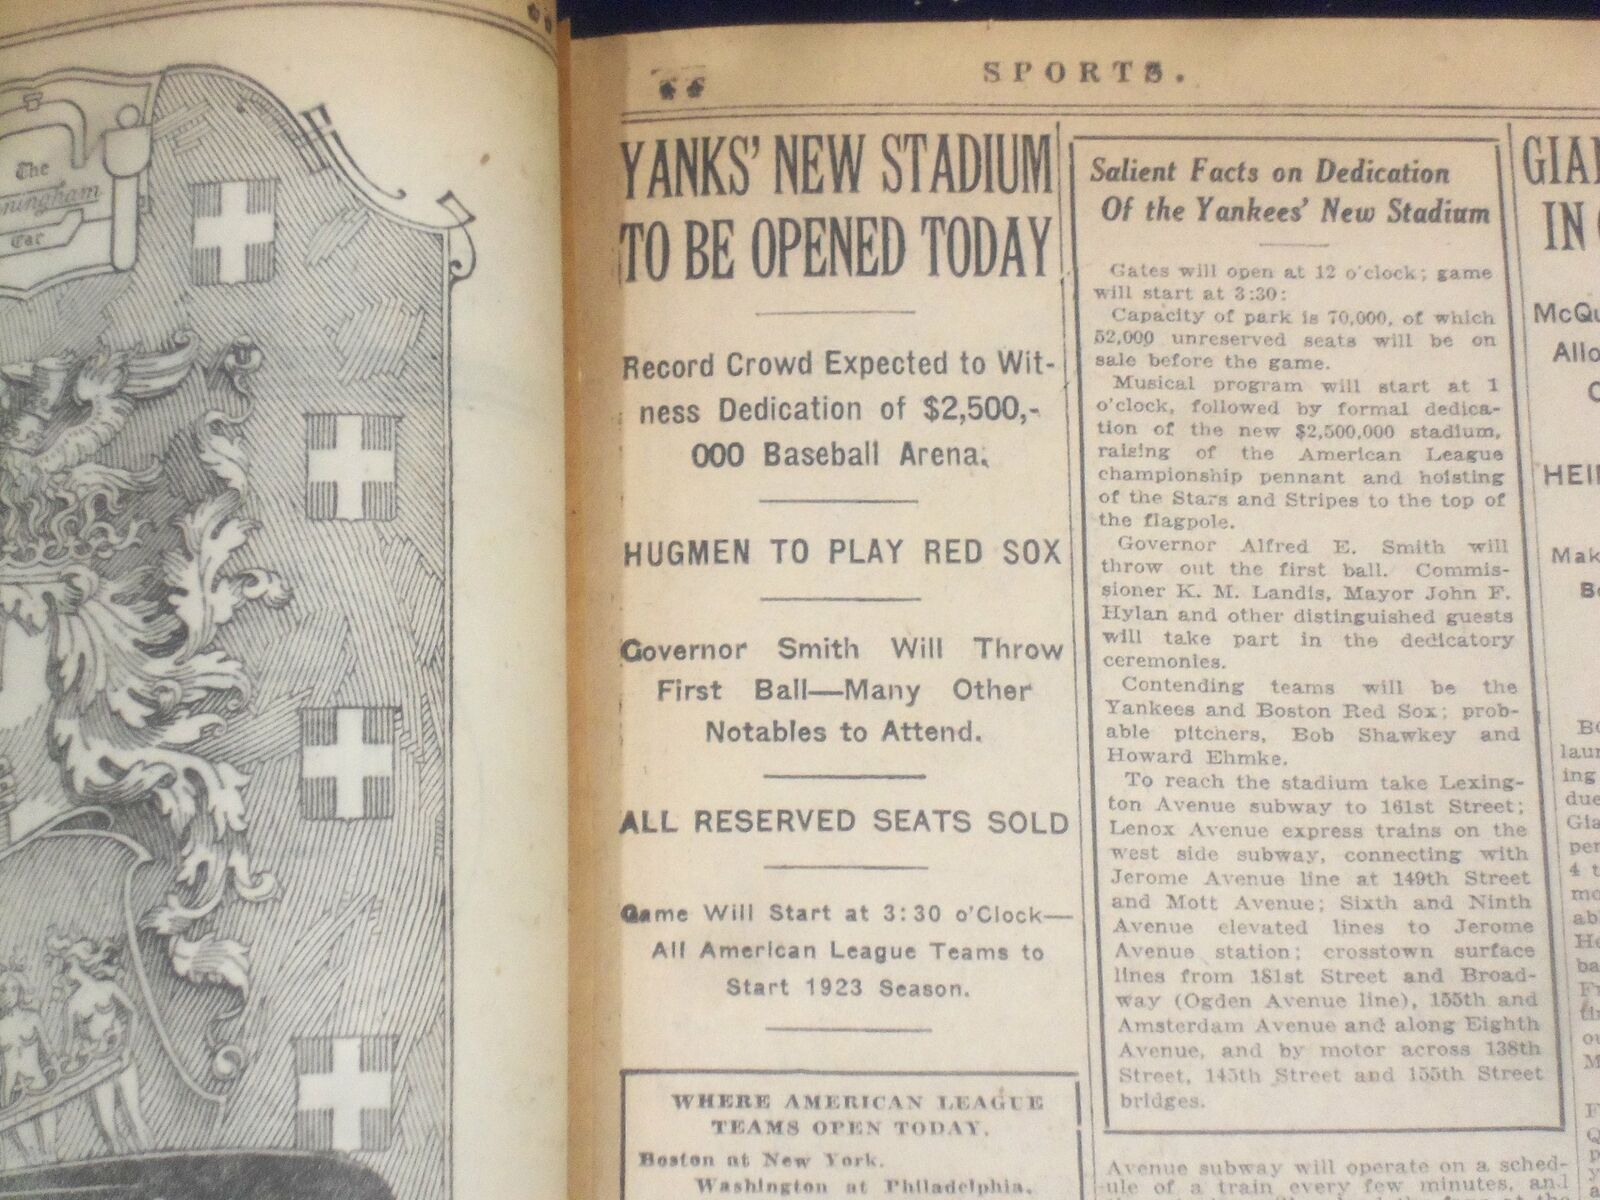 1923 APRIL 18 NEW YORK TIMES - YANKEES NEW STADIUM TO BE OPENED TODAY - NT 8358